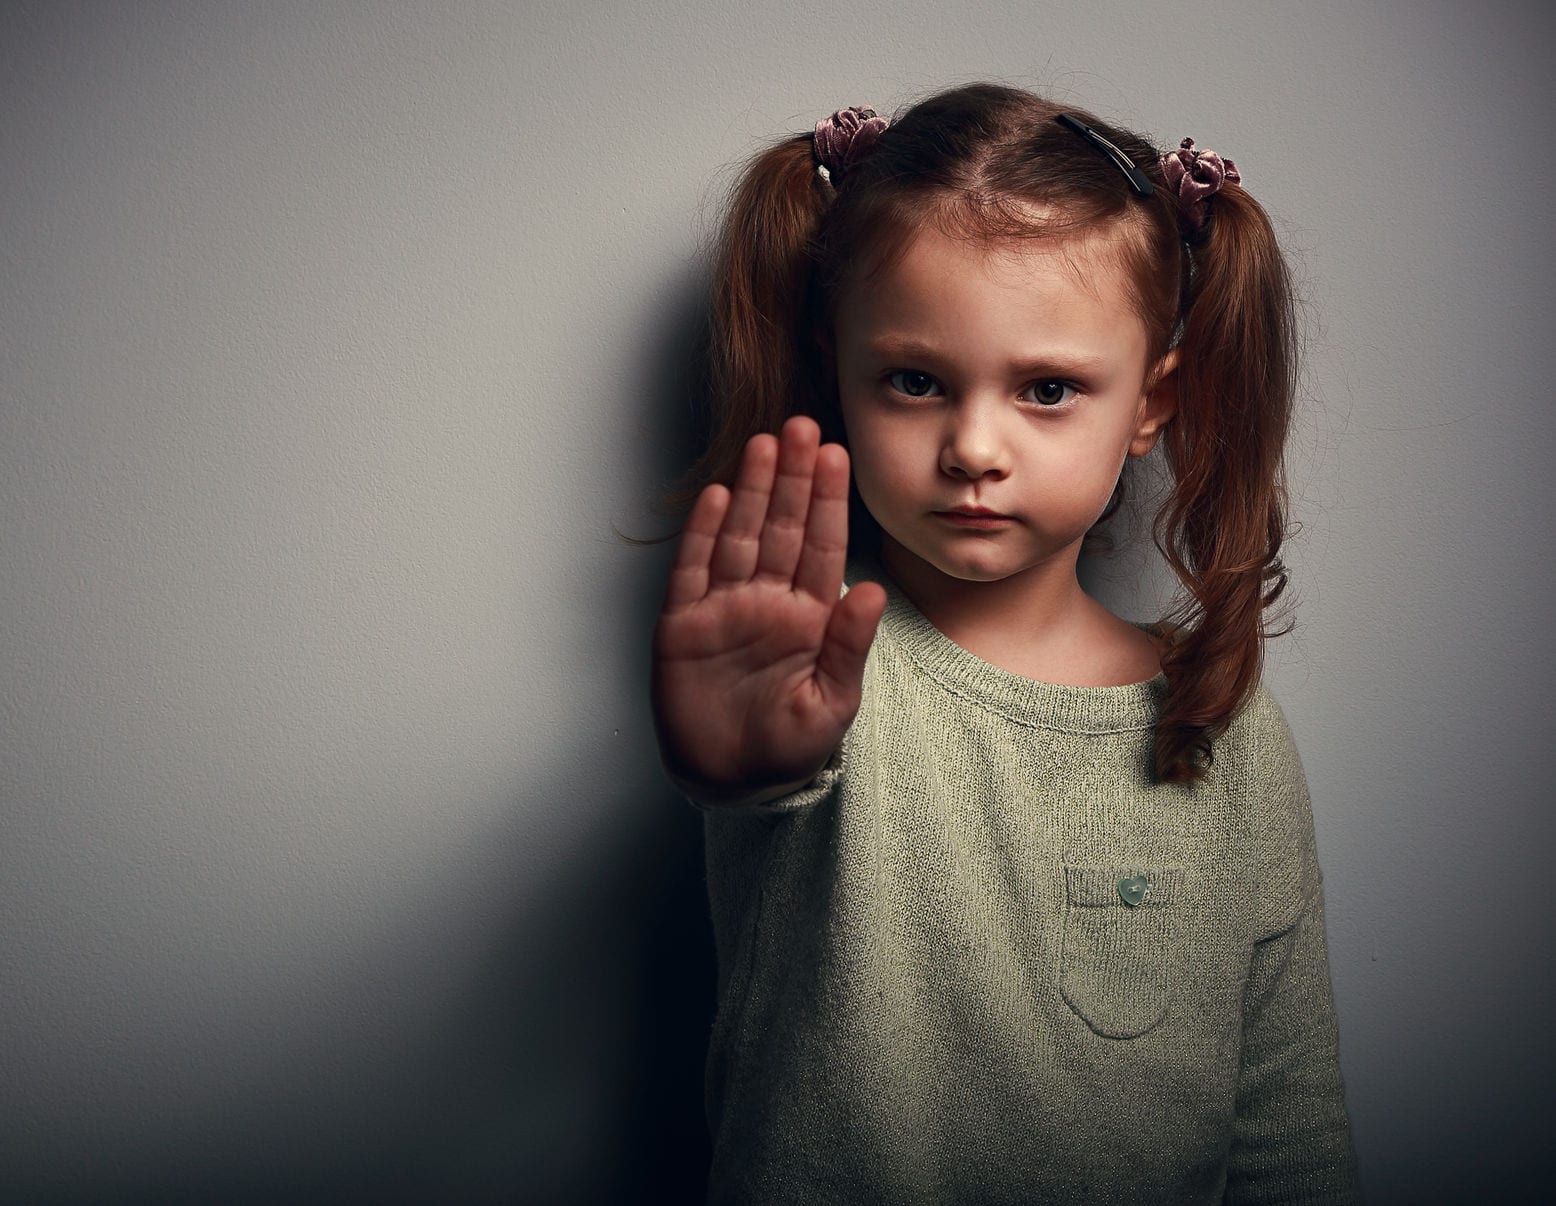 Child Abuse Epidemic? What’s Really Happening in Minnesota